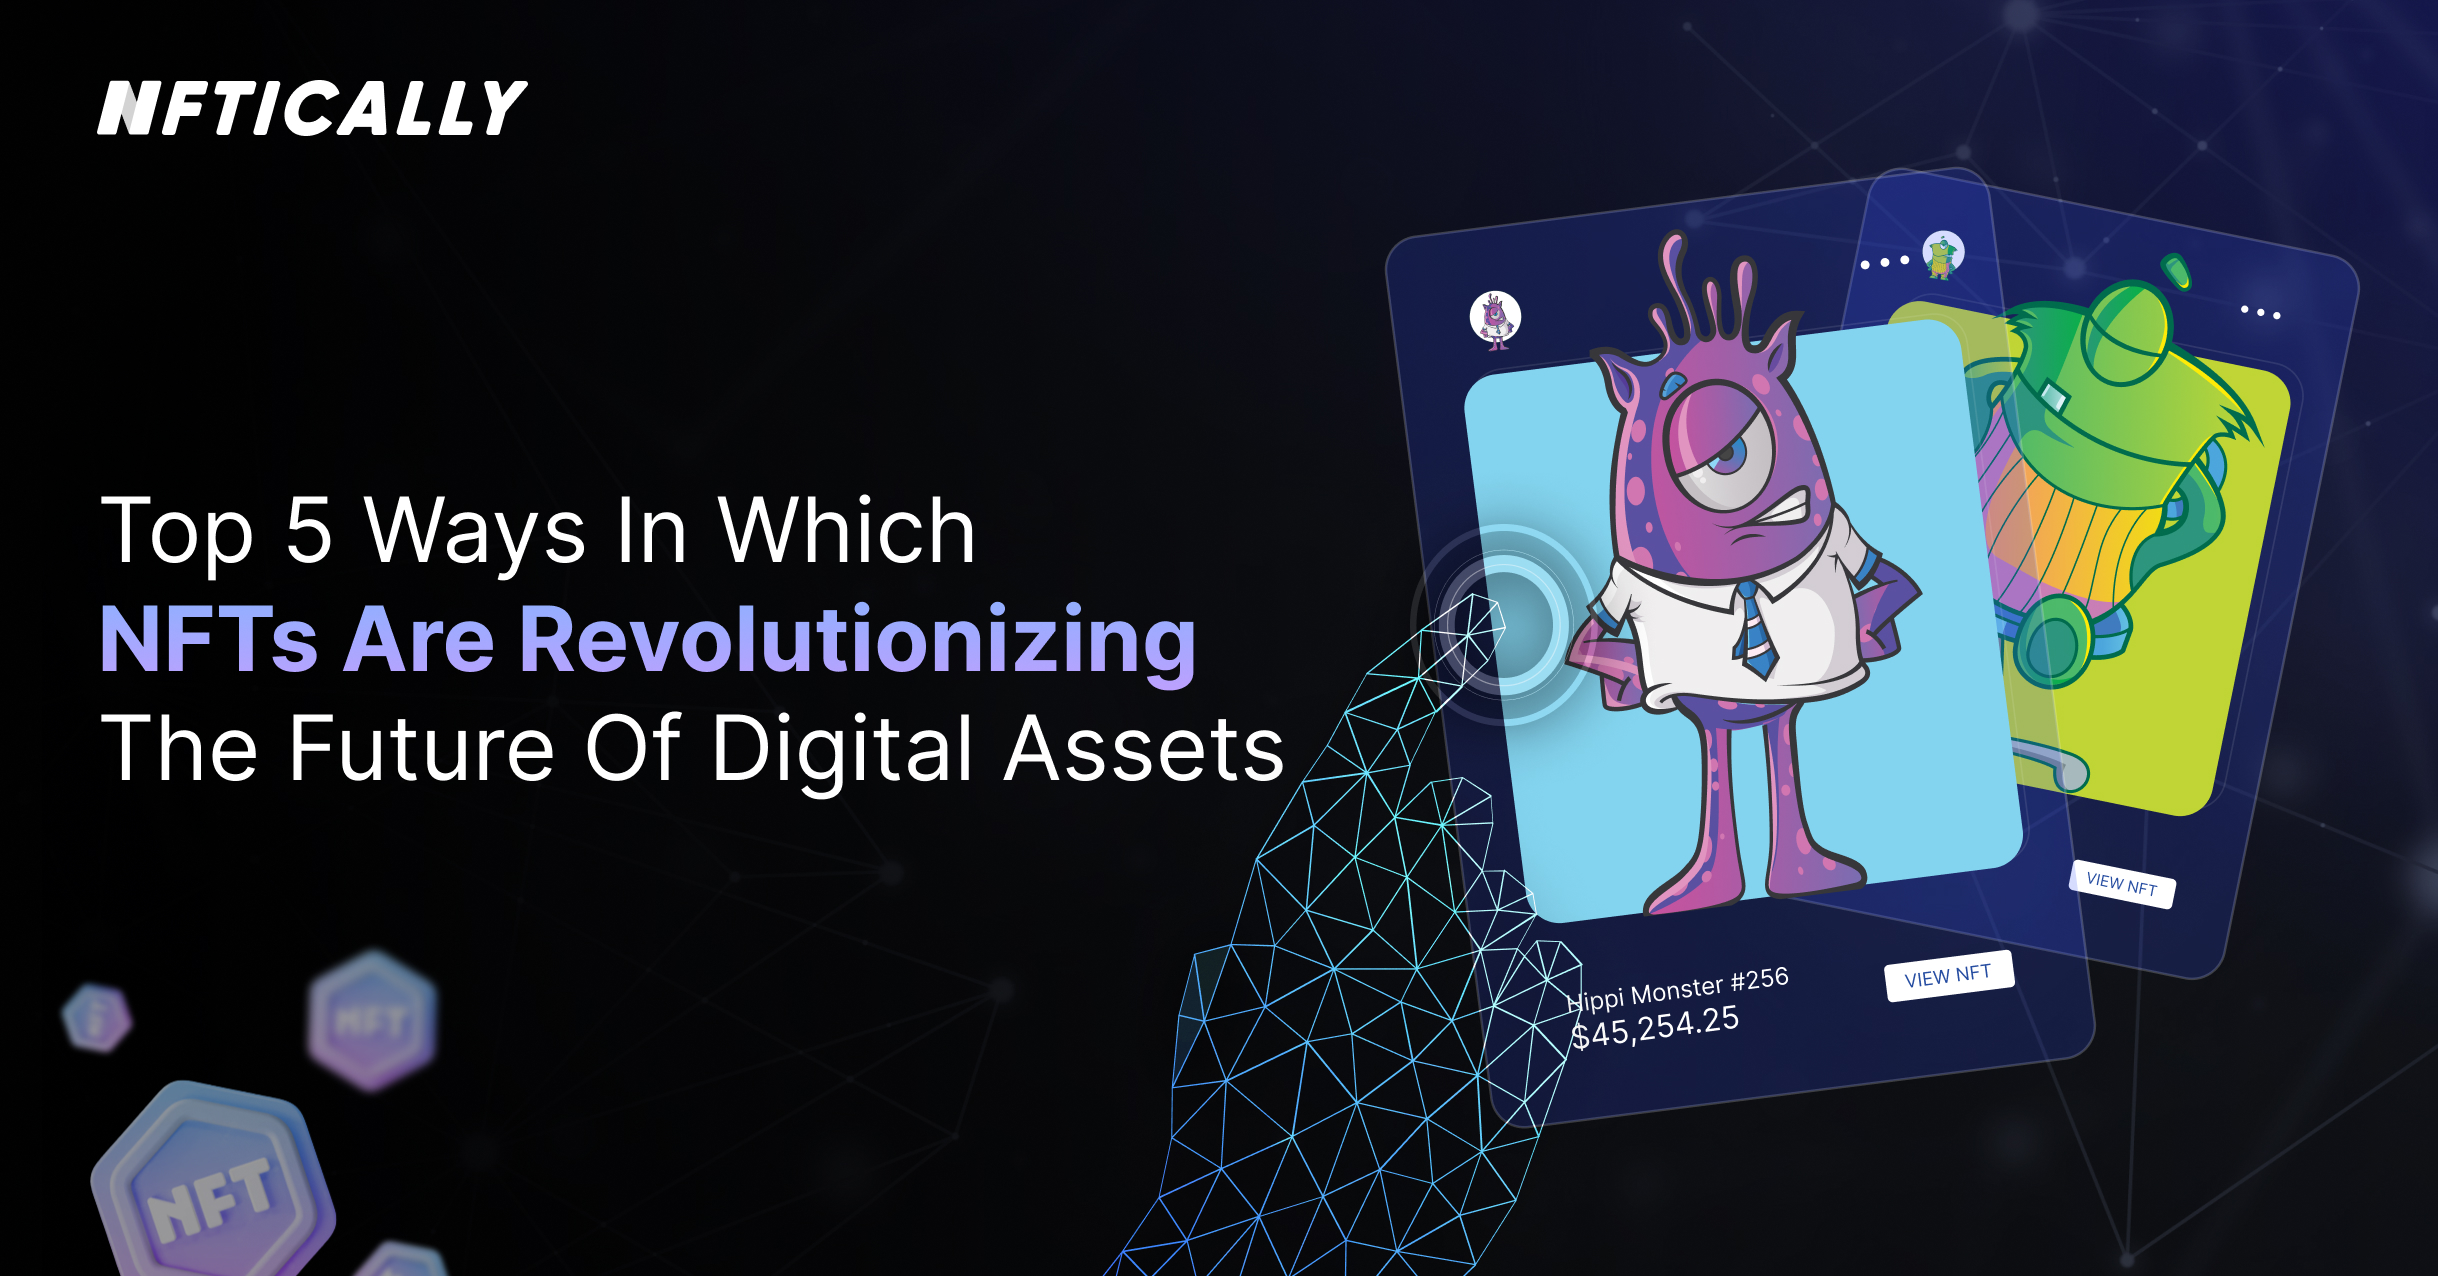 Top 5 Ways in Which NFTs Are Revolutionizing the Future of Digital Assets